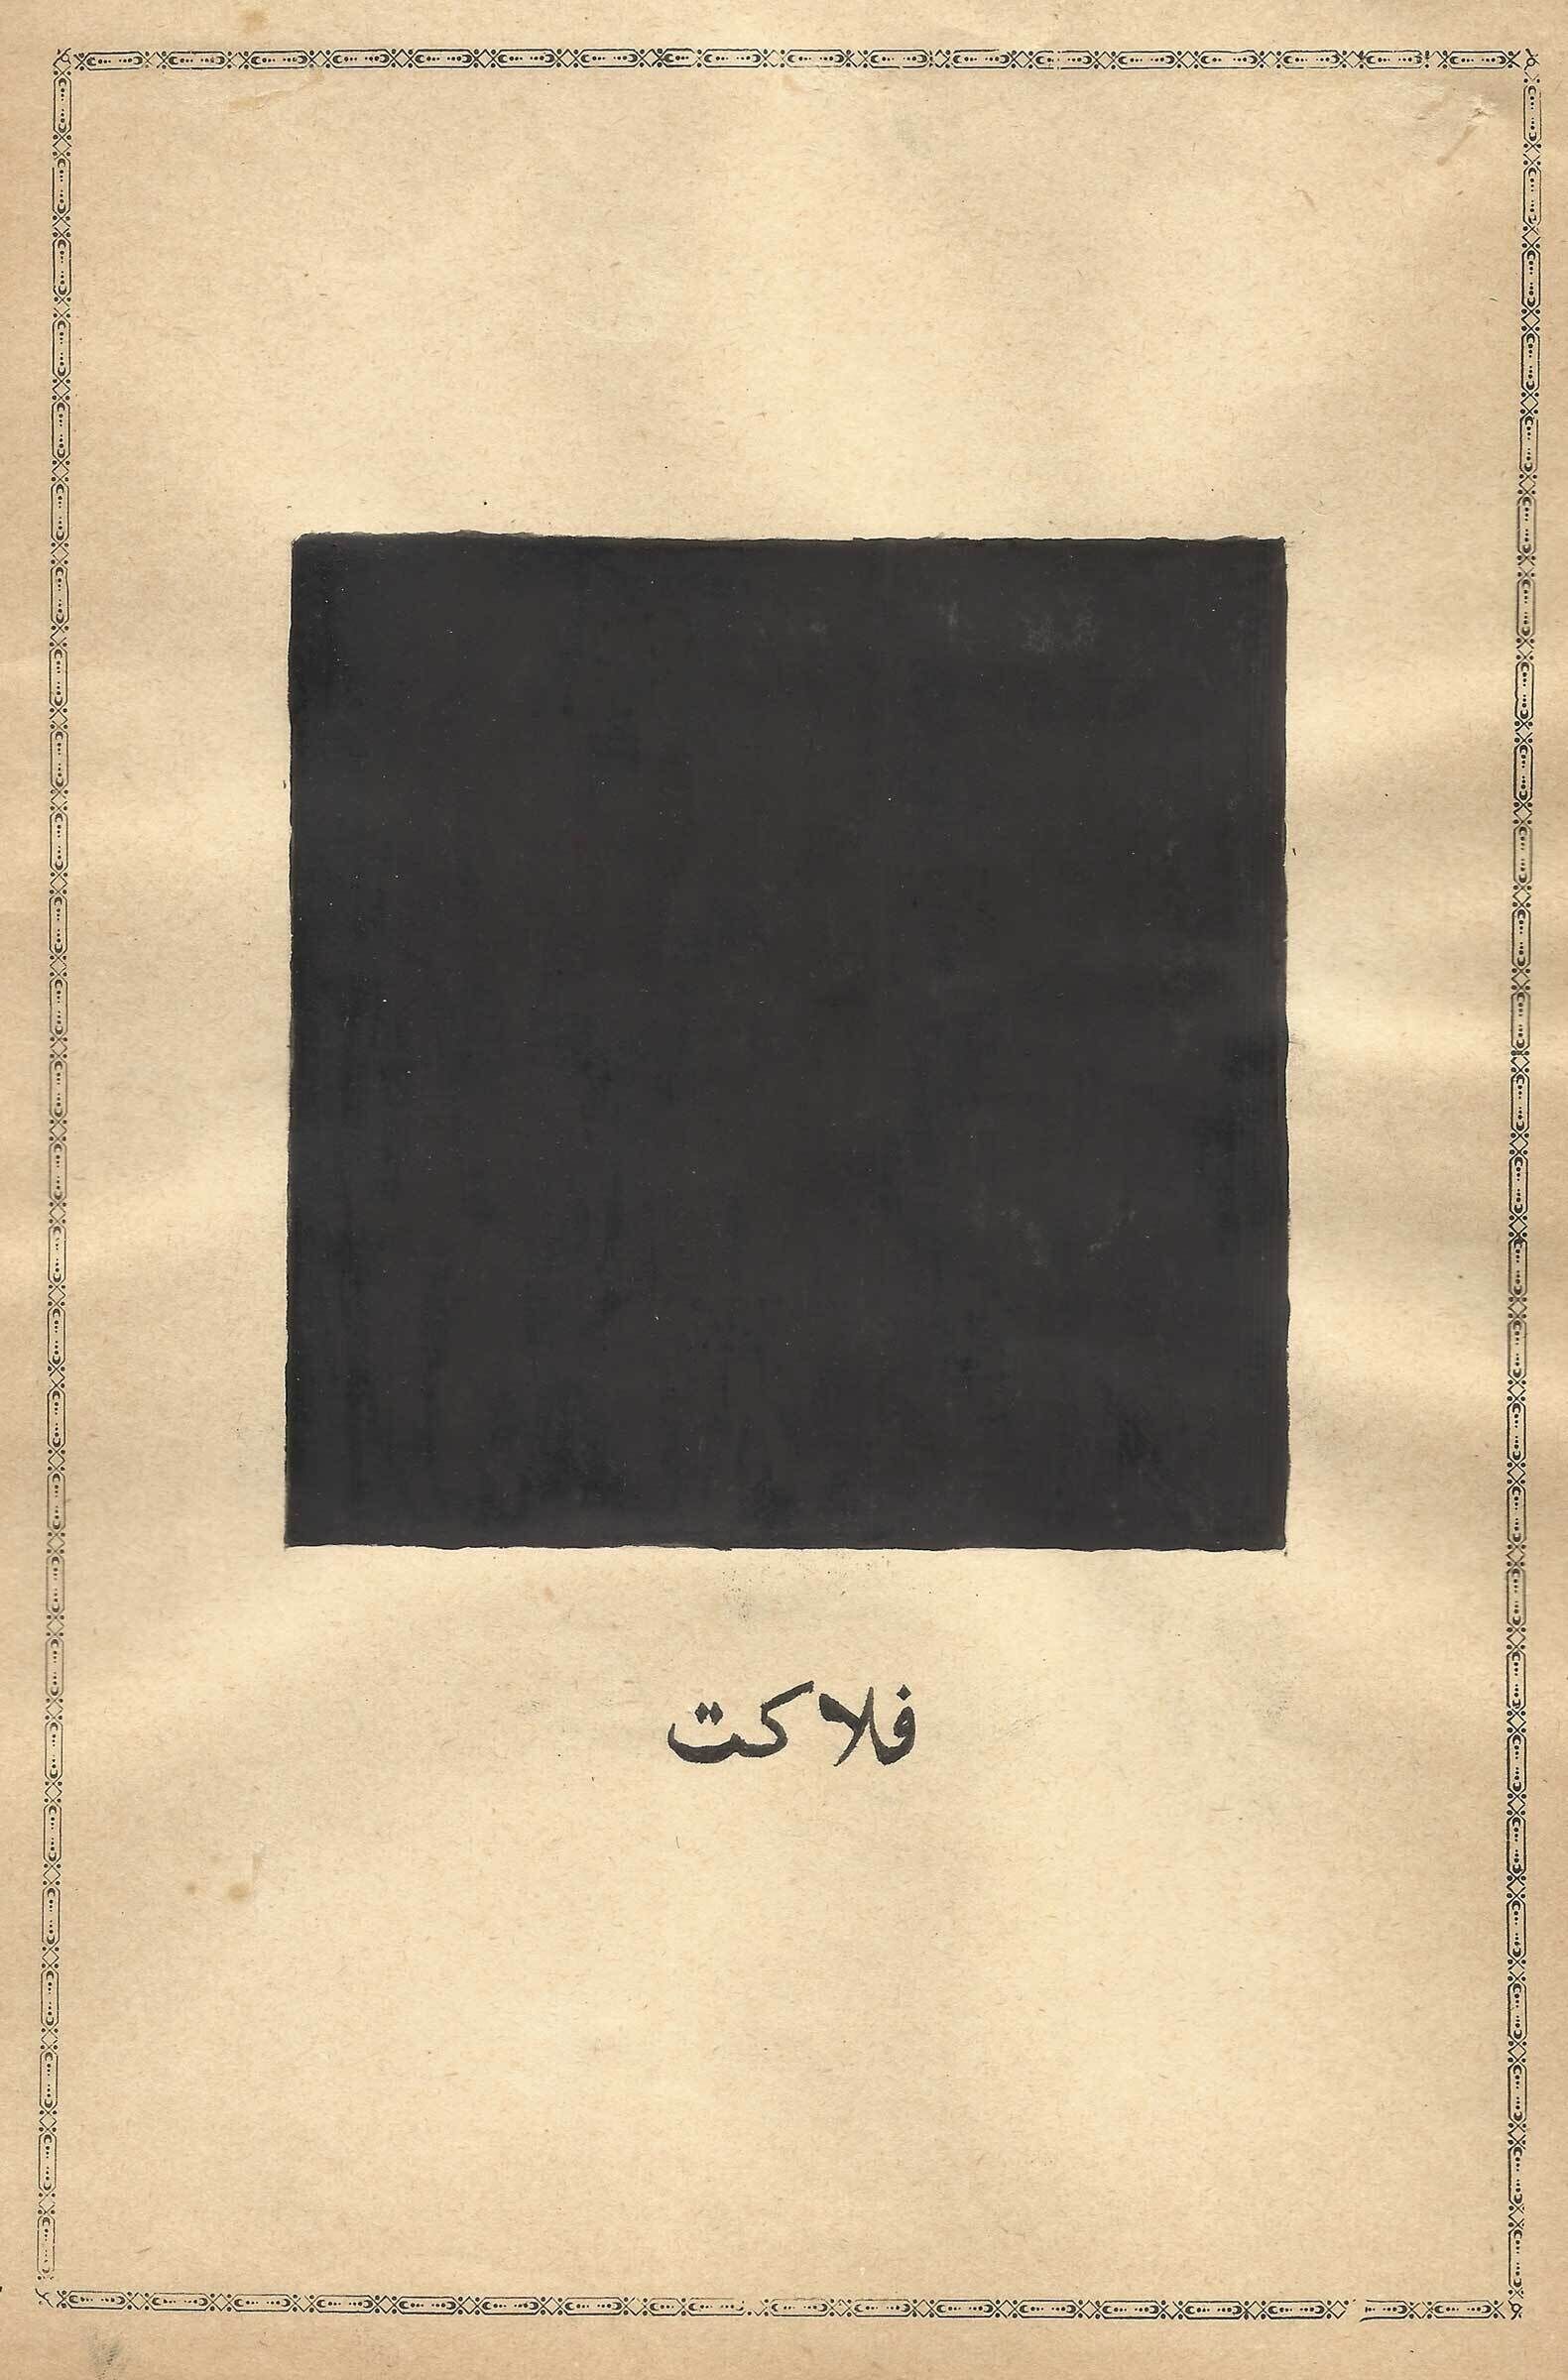 A black square centered on a beige paper with decorative borders and Arabic script at the bottom.